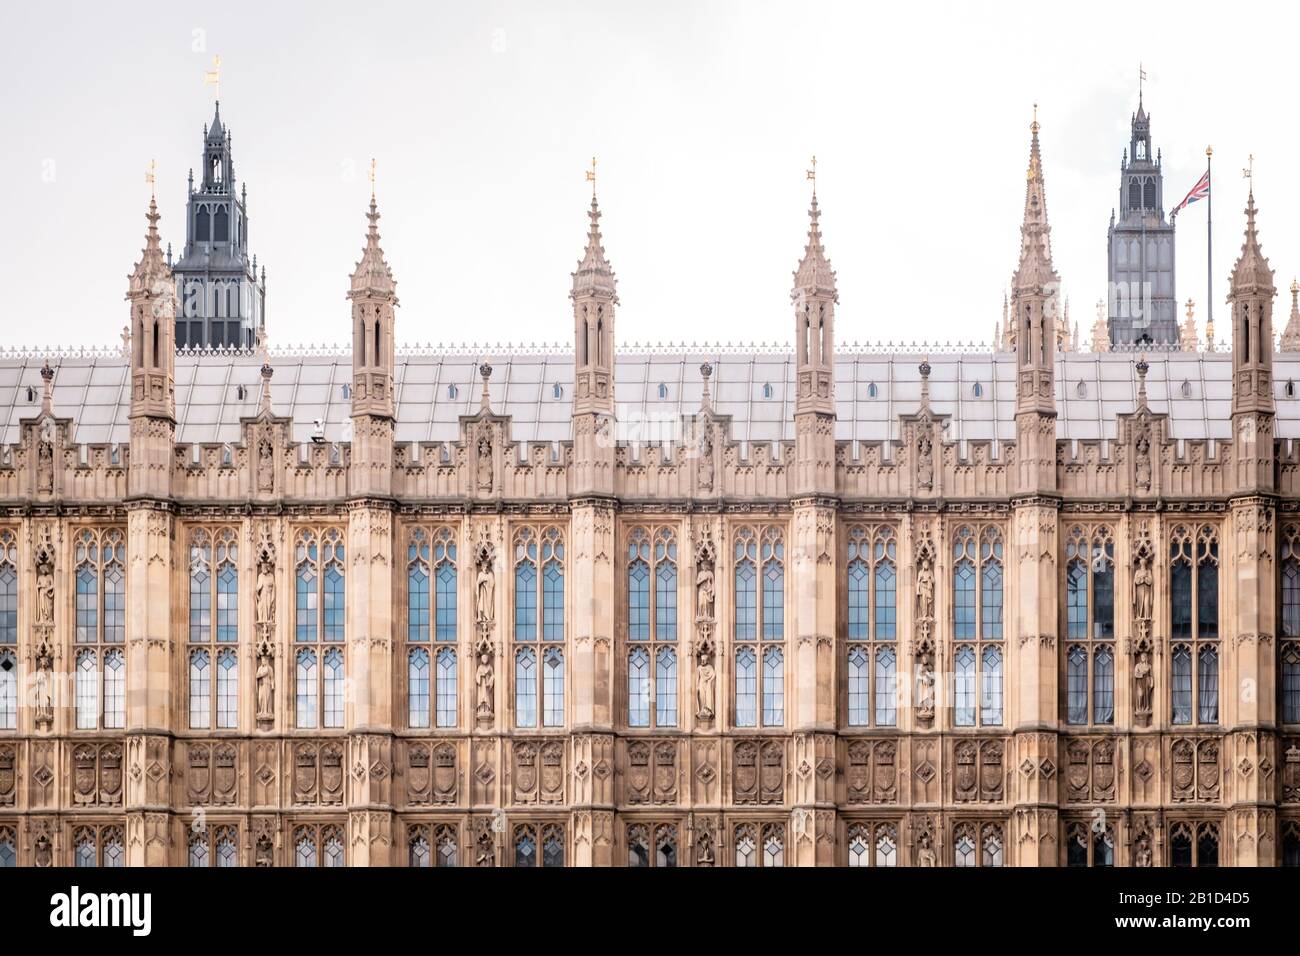 Meeting place of the House of Commons and House of Lords, London, UK. Stock Photo